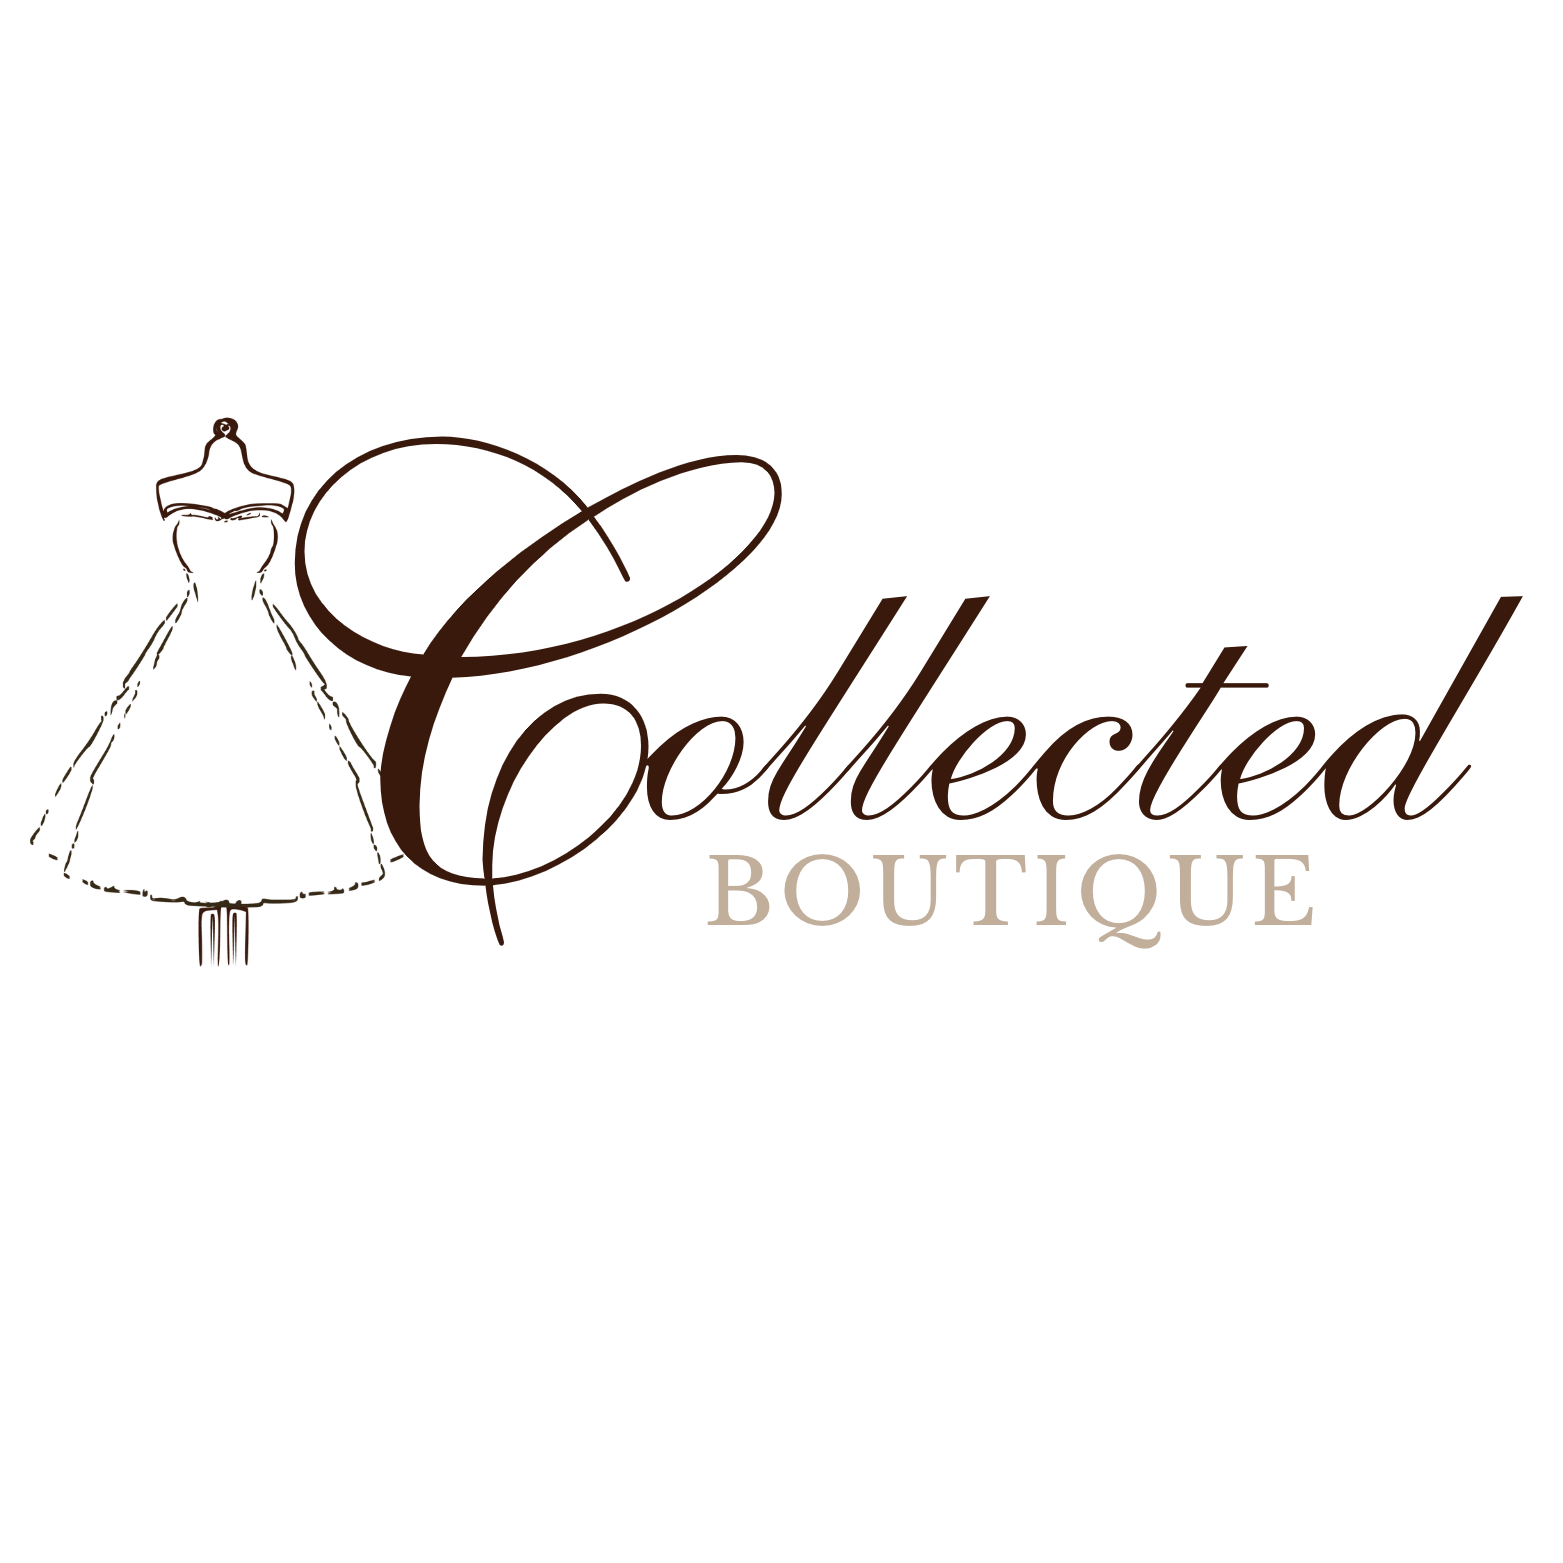 Clothing Collection – Collected Boutique